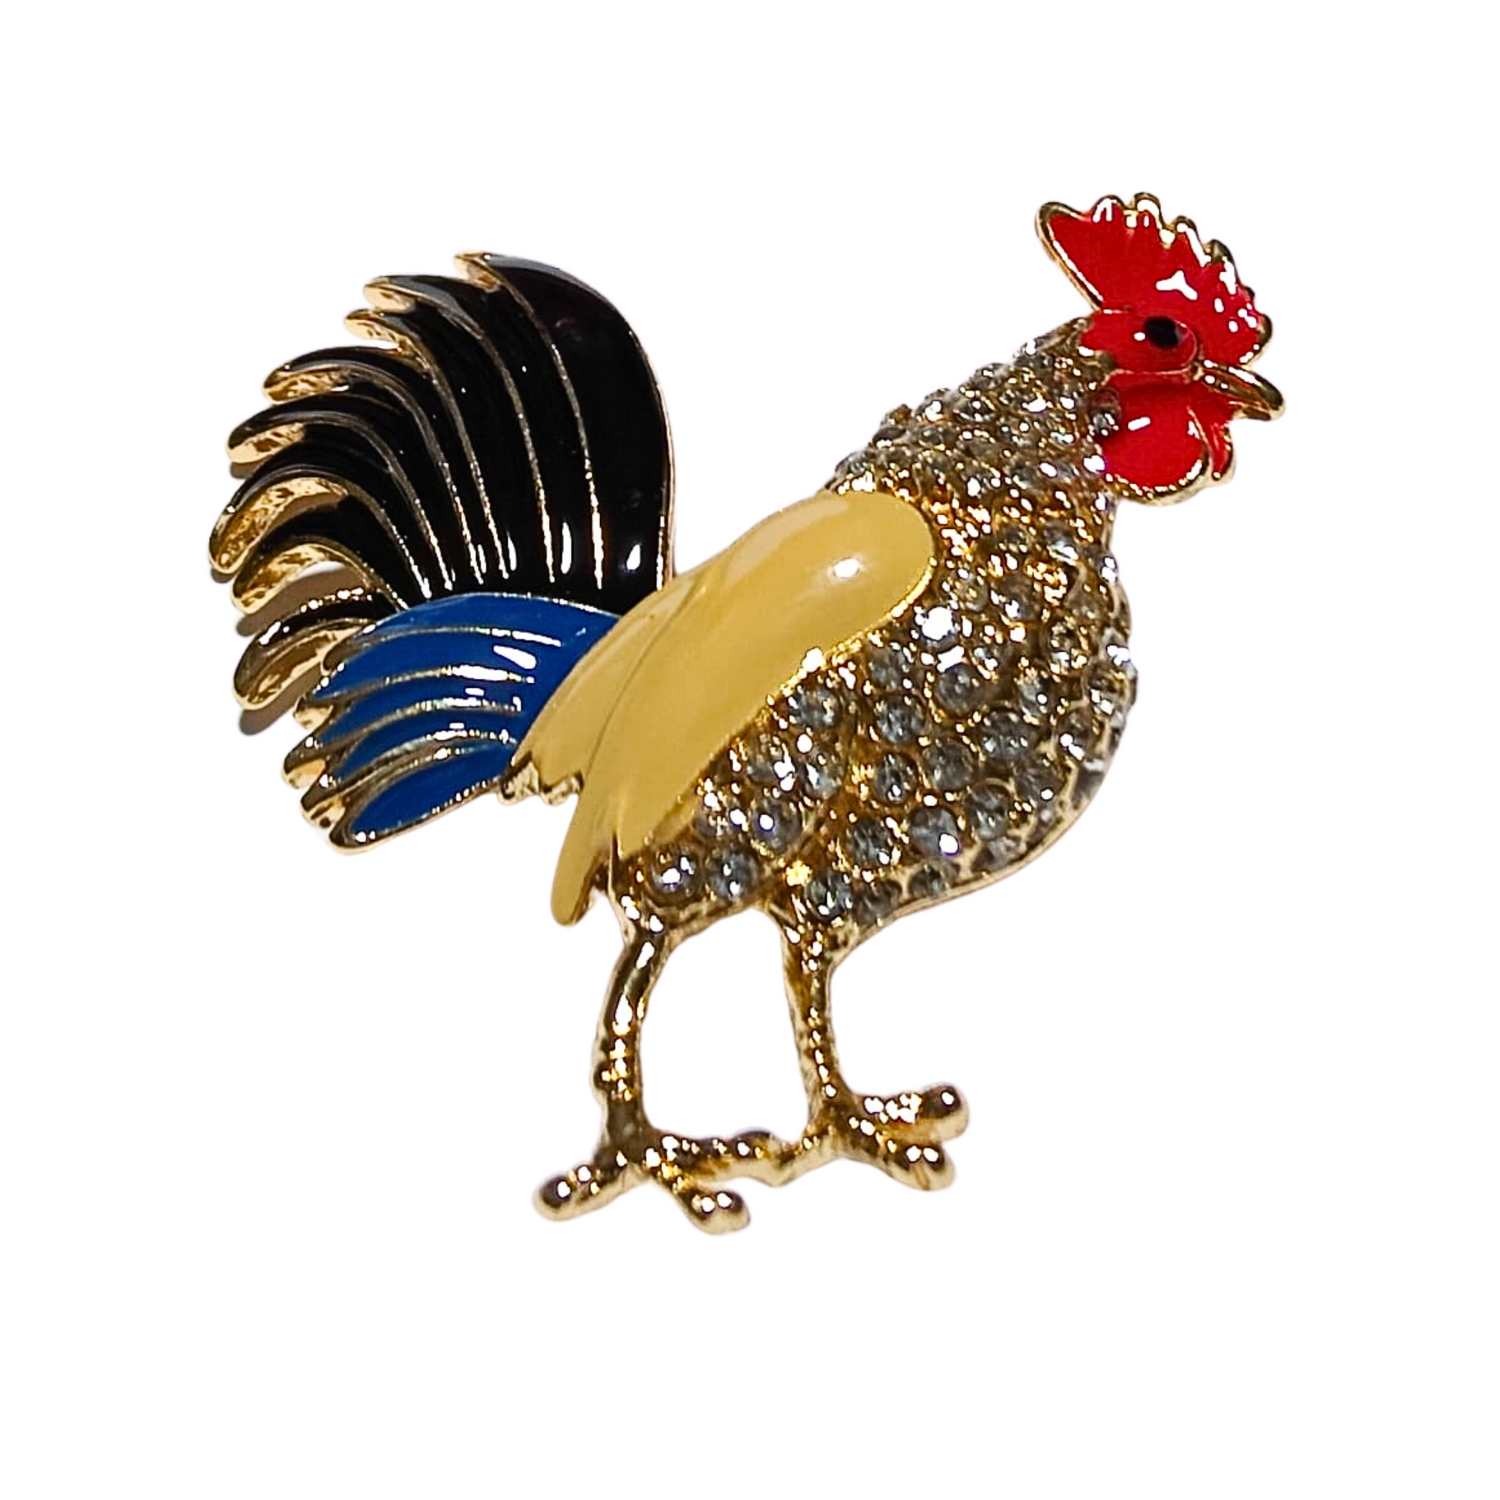 Blue, Red, Yellow and Black Gemstone Rooster Lapel Pin